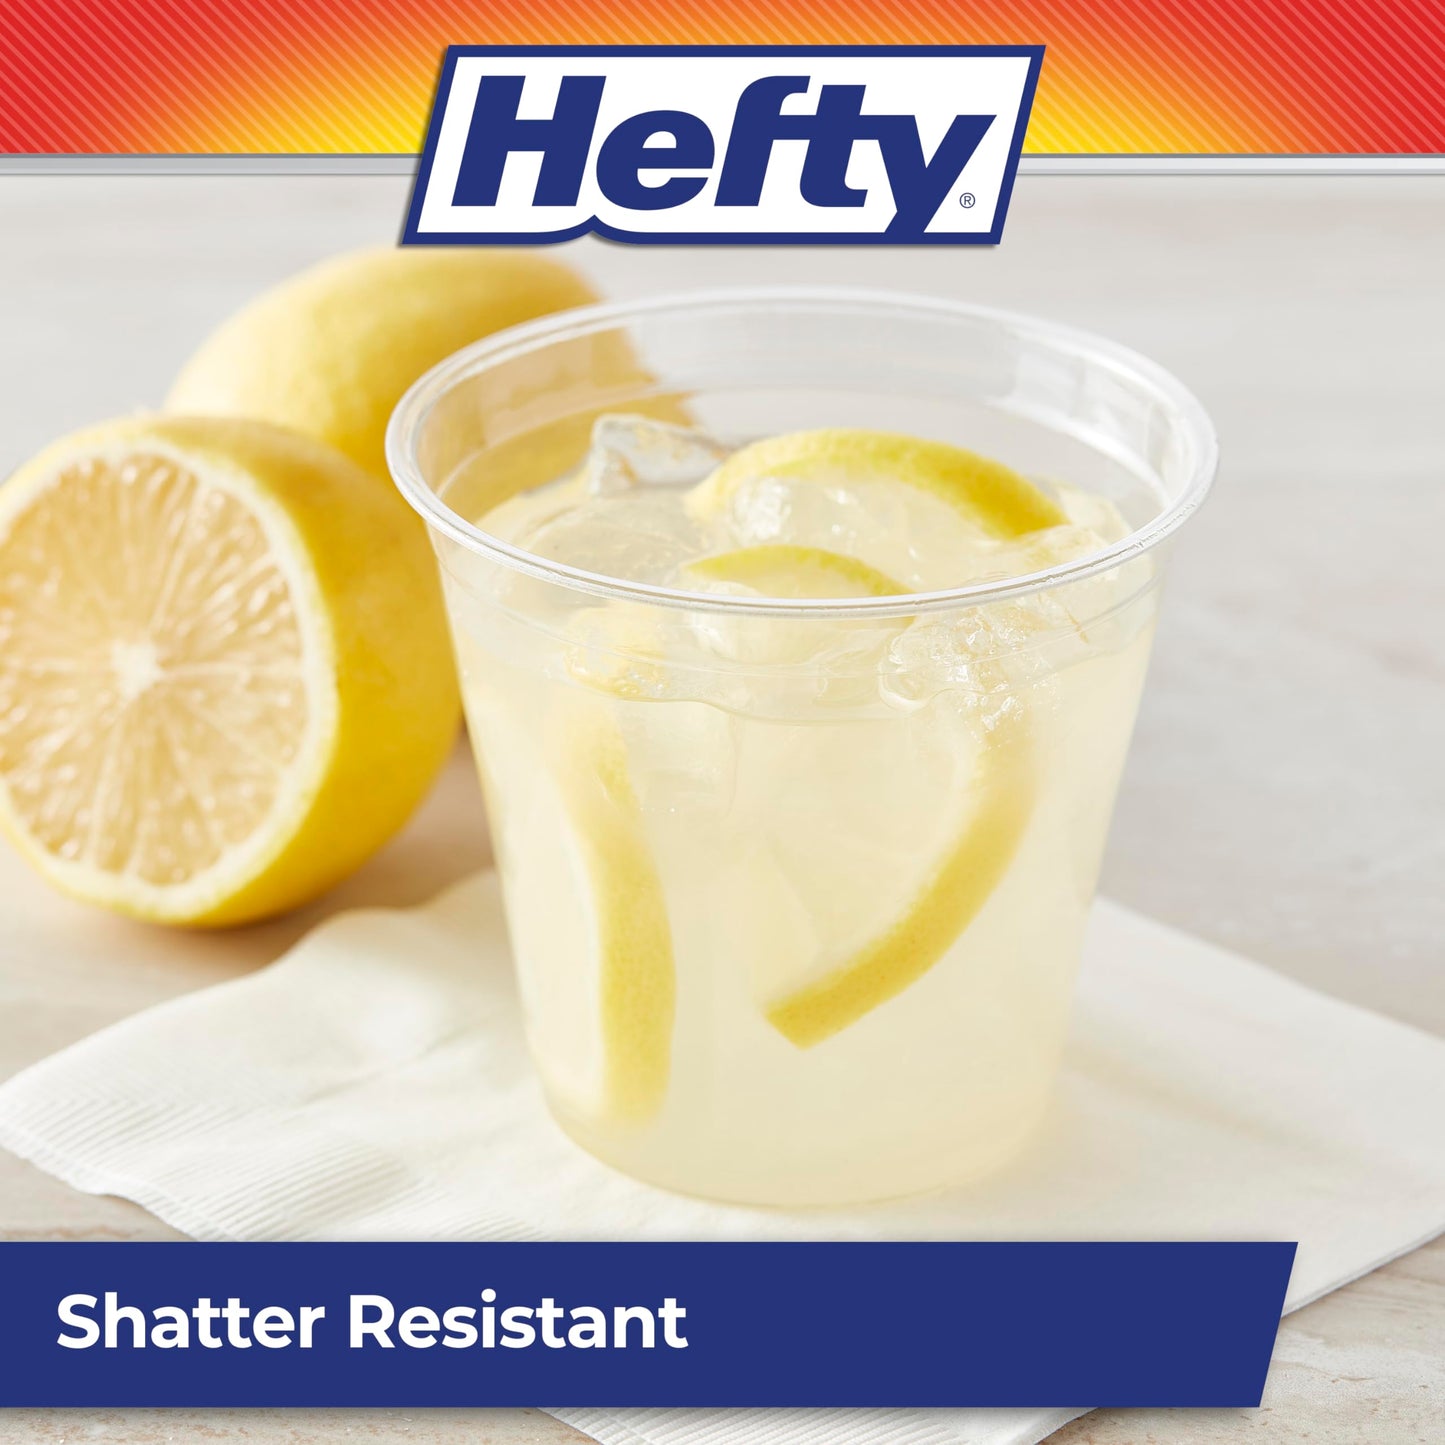 Hefty Deluxe Clear Plastic Party Cups (9 Ounce, 40 Count)